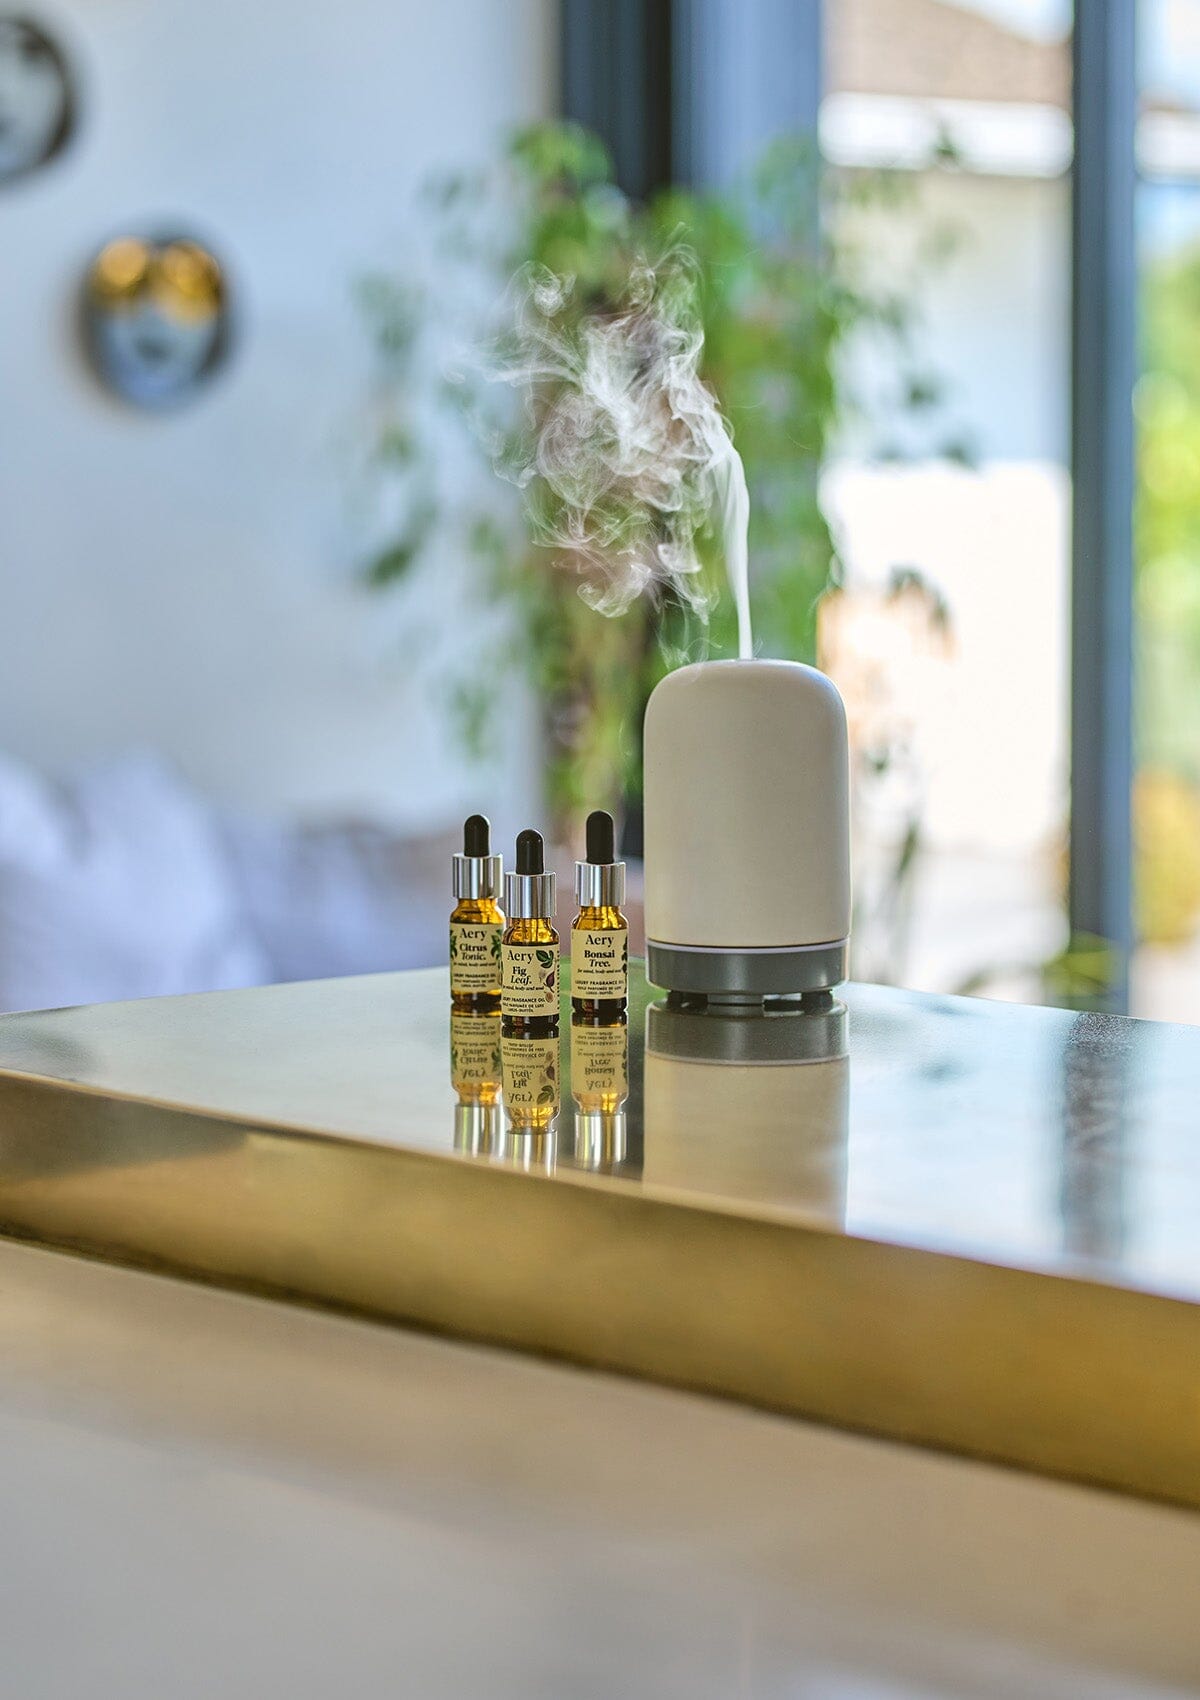 Cream Citrus Tonic, Fig leaf and Bonsai Tree fragrance oils by Aery displayed next to electric diffuser on gold kitchen worktop